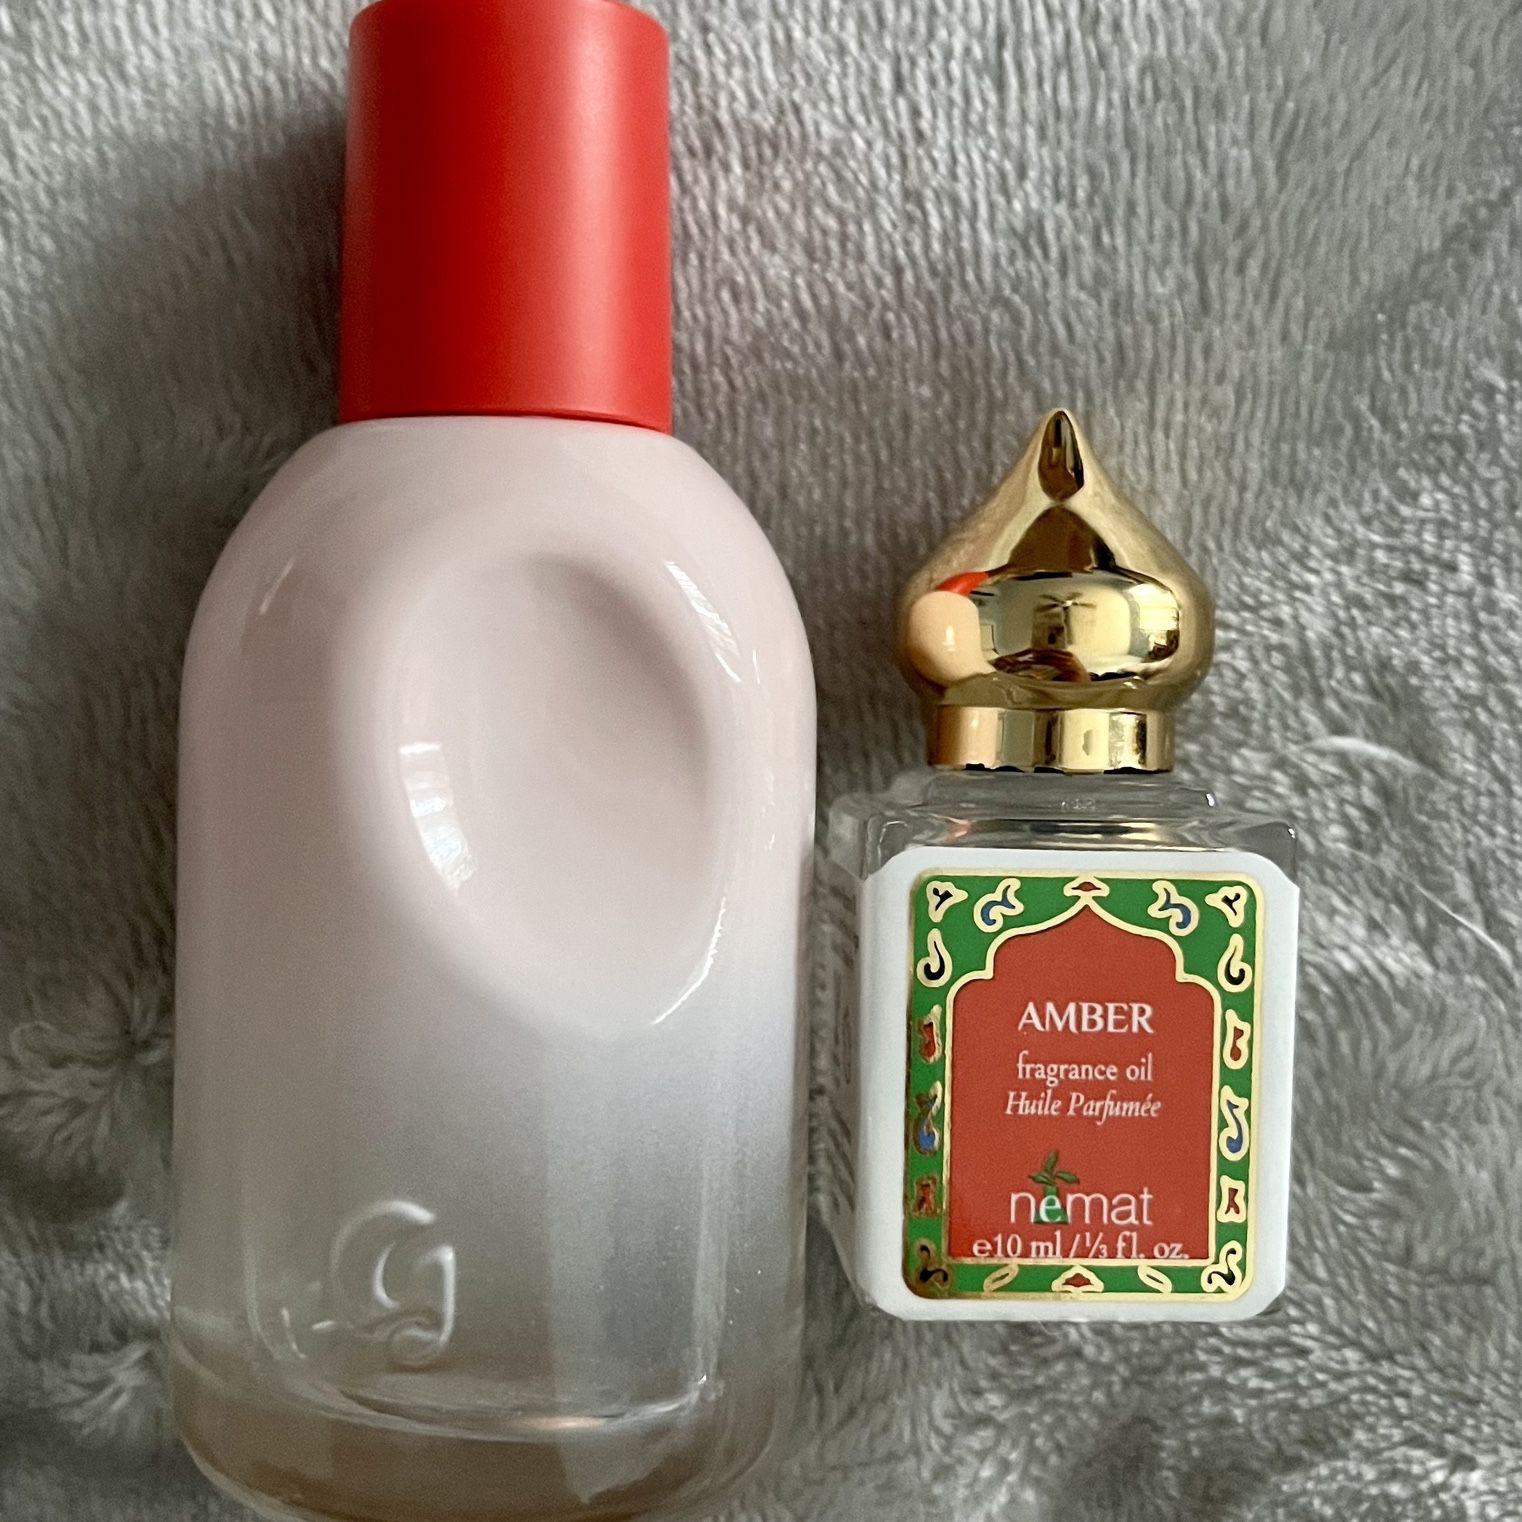 Glossier You EDP + Nemat Amber Perfume Oil for Sale in Orlando, FL - OfferUp